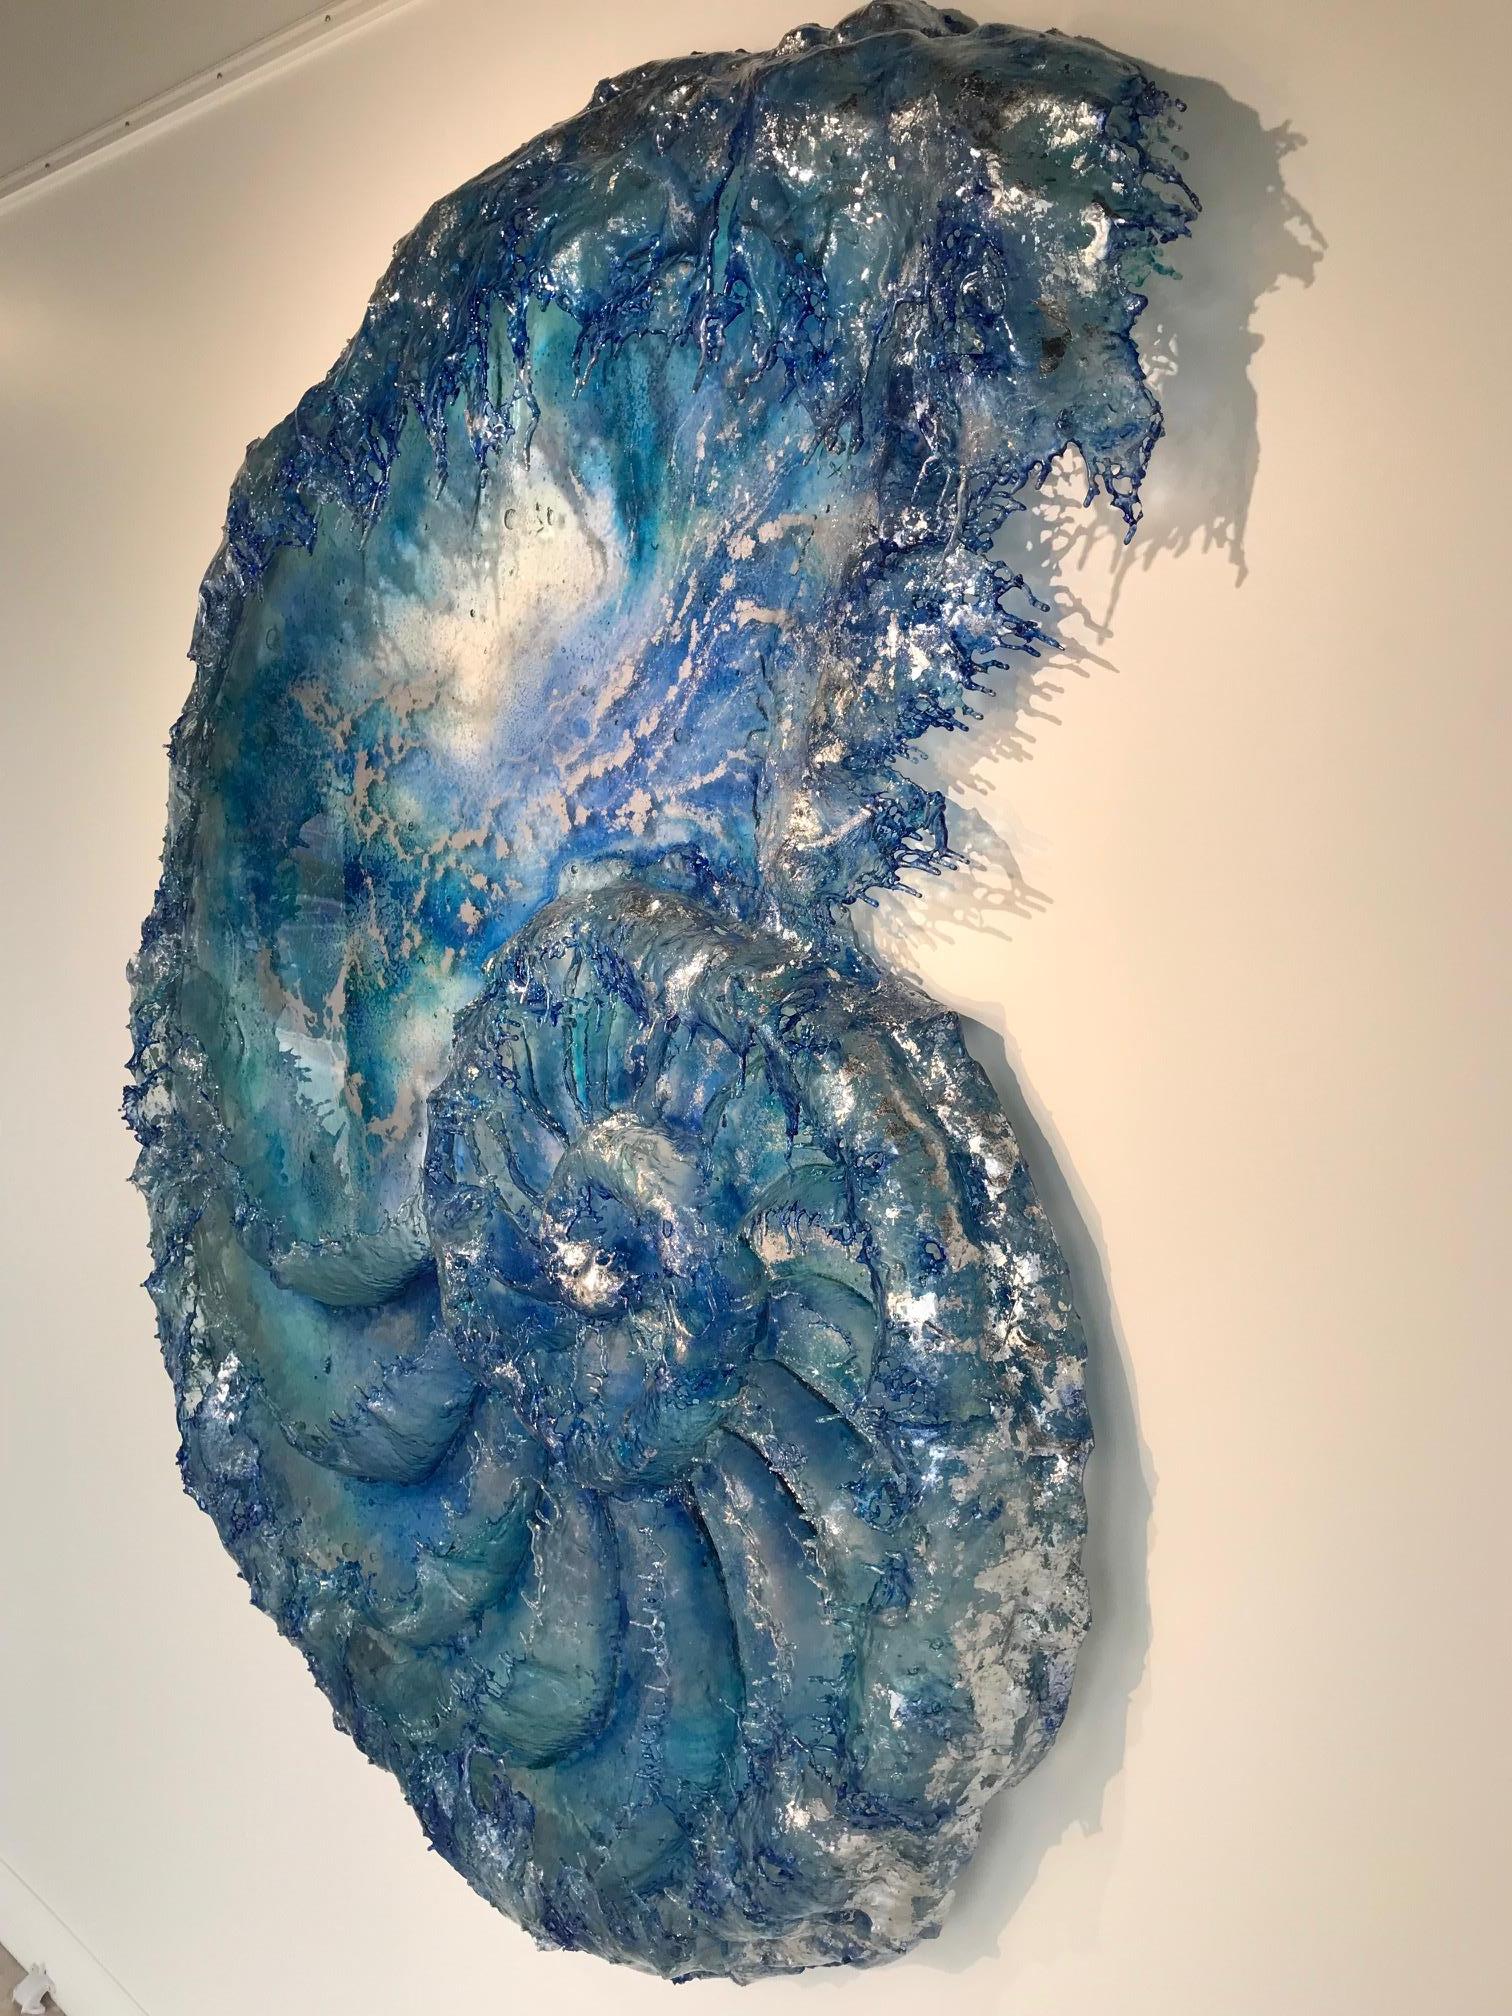 Each piece of art created by Annalu is a unique one of a kind.  This particular artwork is mixed media including resin, silver leaf, ink, ash, etc.

Artist's bio:
Italian artist Annaluigia Boretto's dreamy sculptures enchant onlookers by her